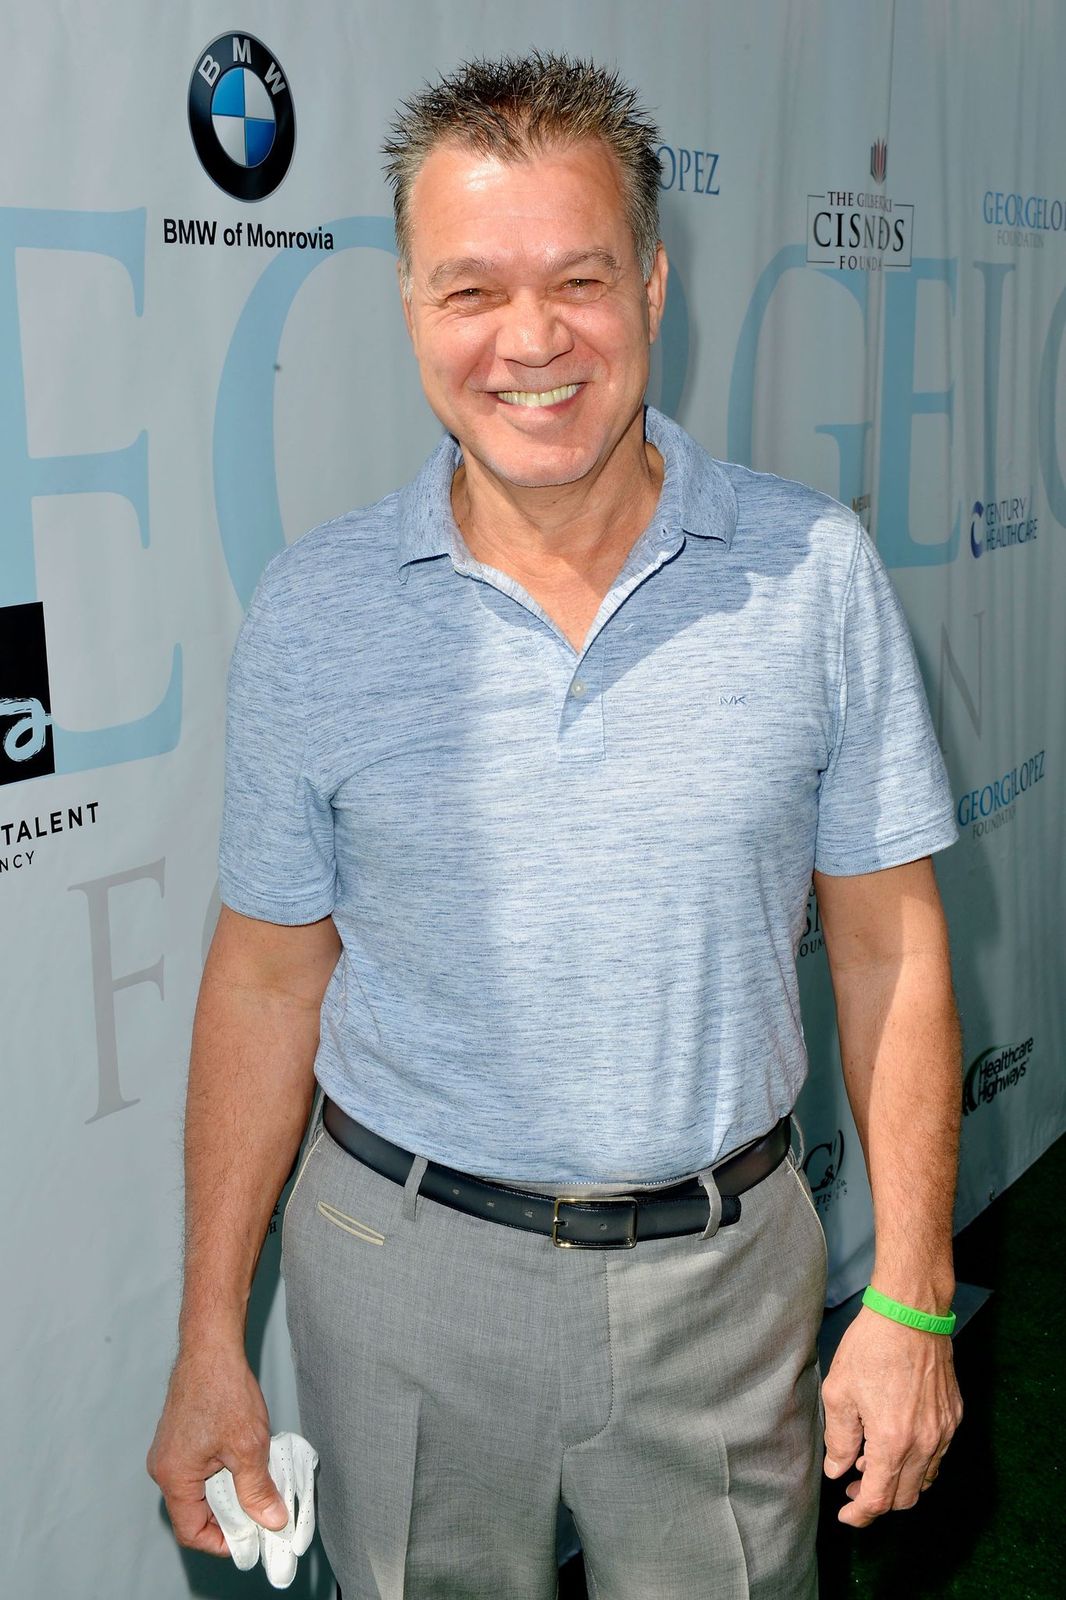 Eddie Van Halen at the 10th Annual George Lopez Celebrity Golf Classic at Lakeside Country Club on May 1, 2017, in Toluca Lake, California | Photo: Jerod Harris/Getty Images